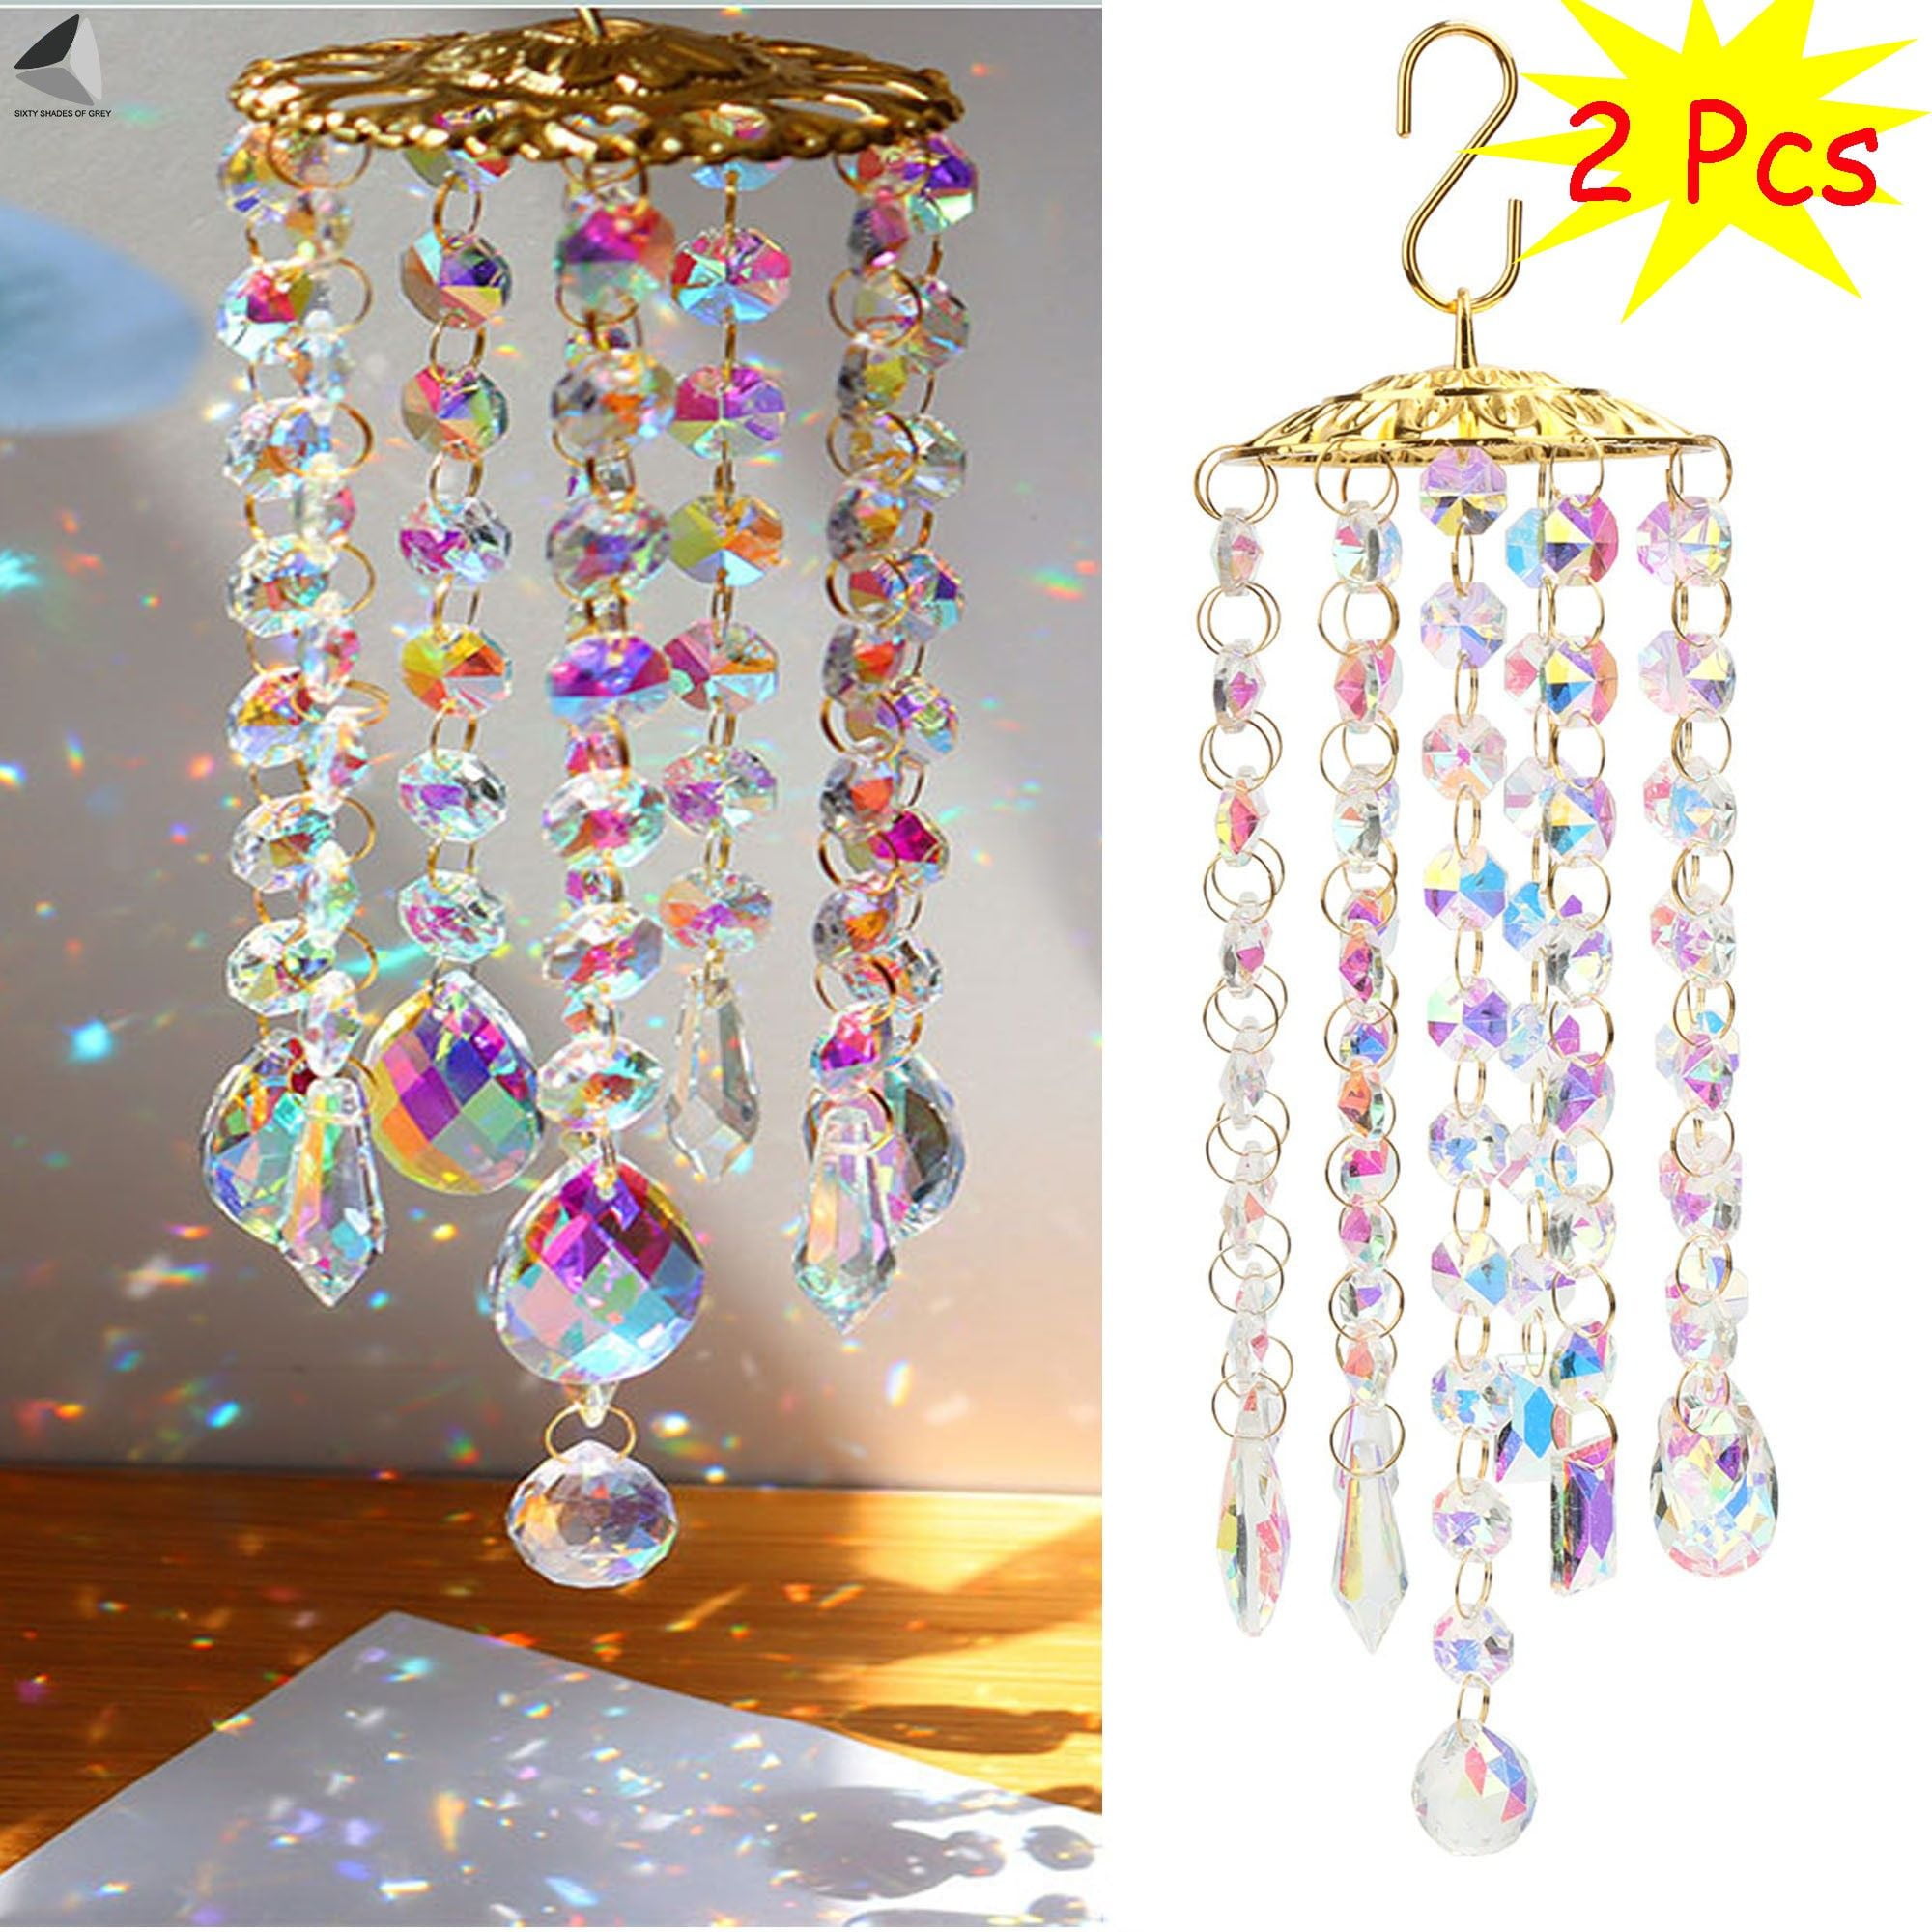 Sixtyshades 2 Pcs Colorful Crystal Prisms Wind Chimes Bling